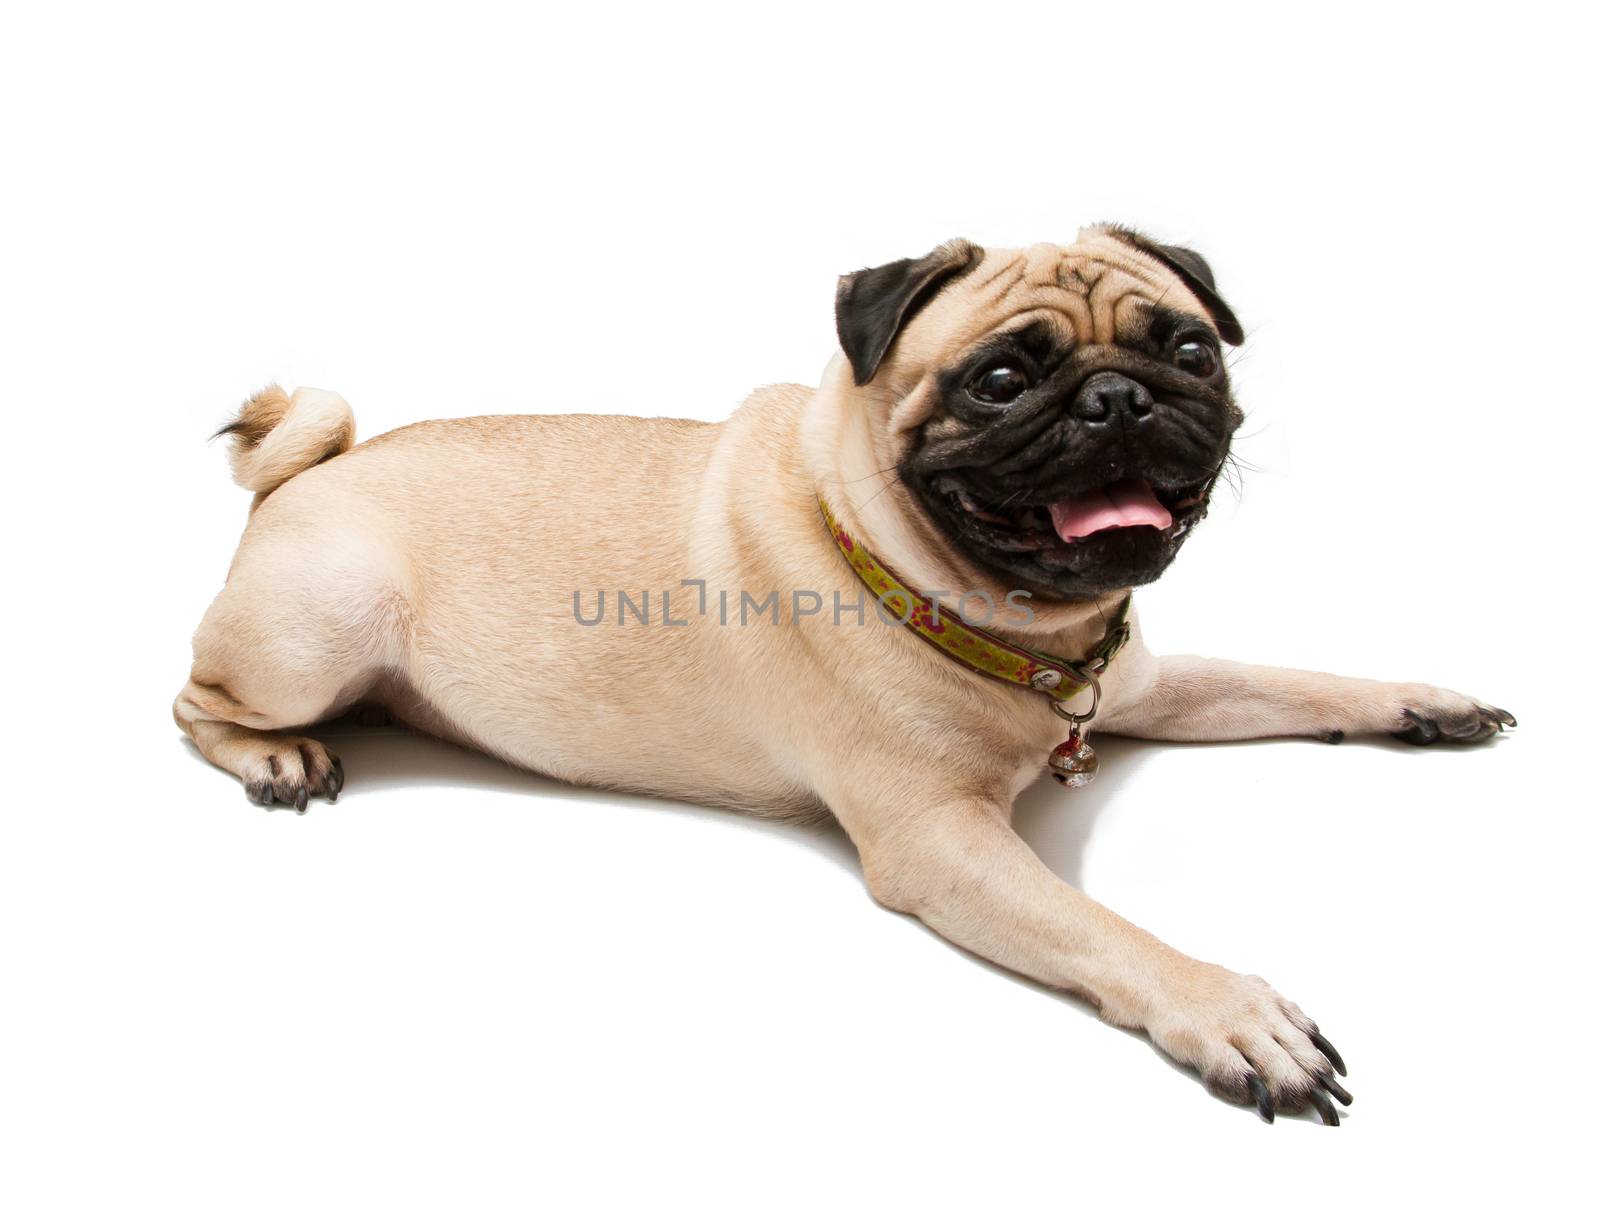 A Pug Dog on white background. by ronnarong